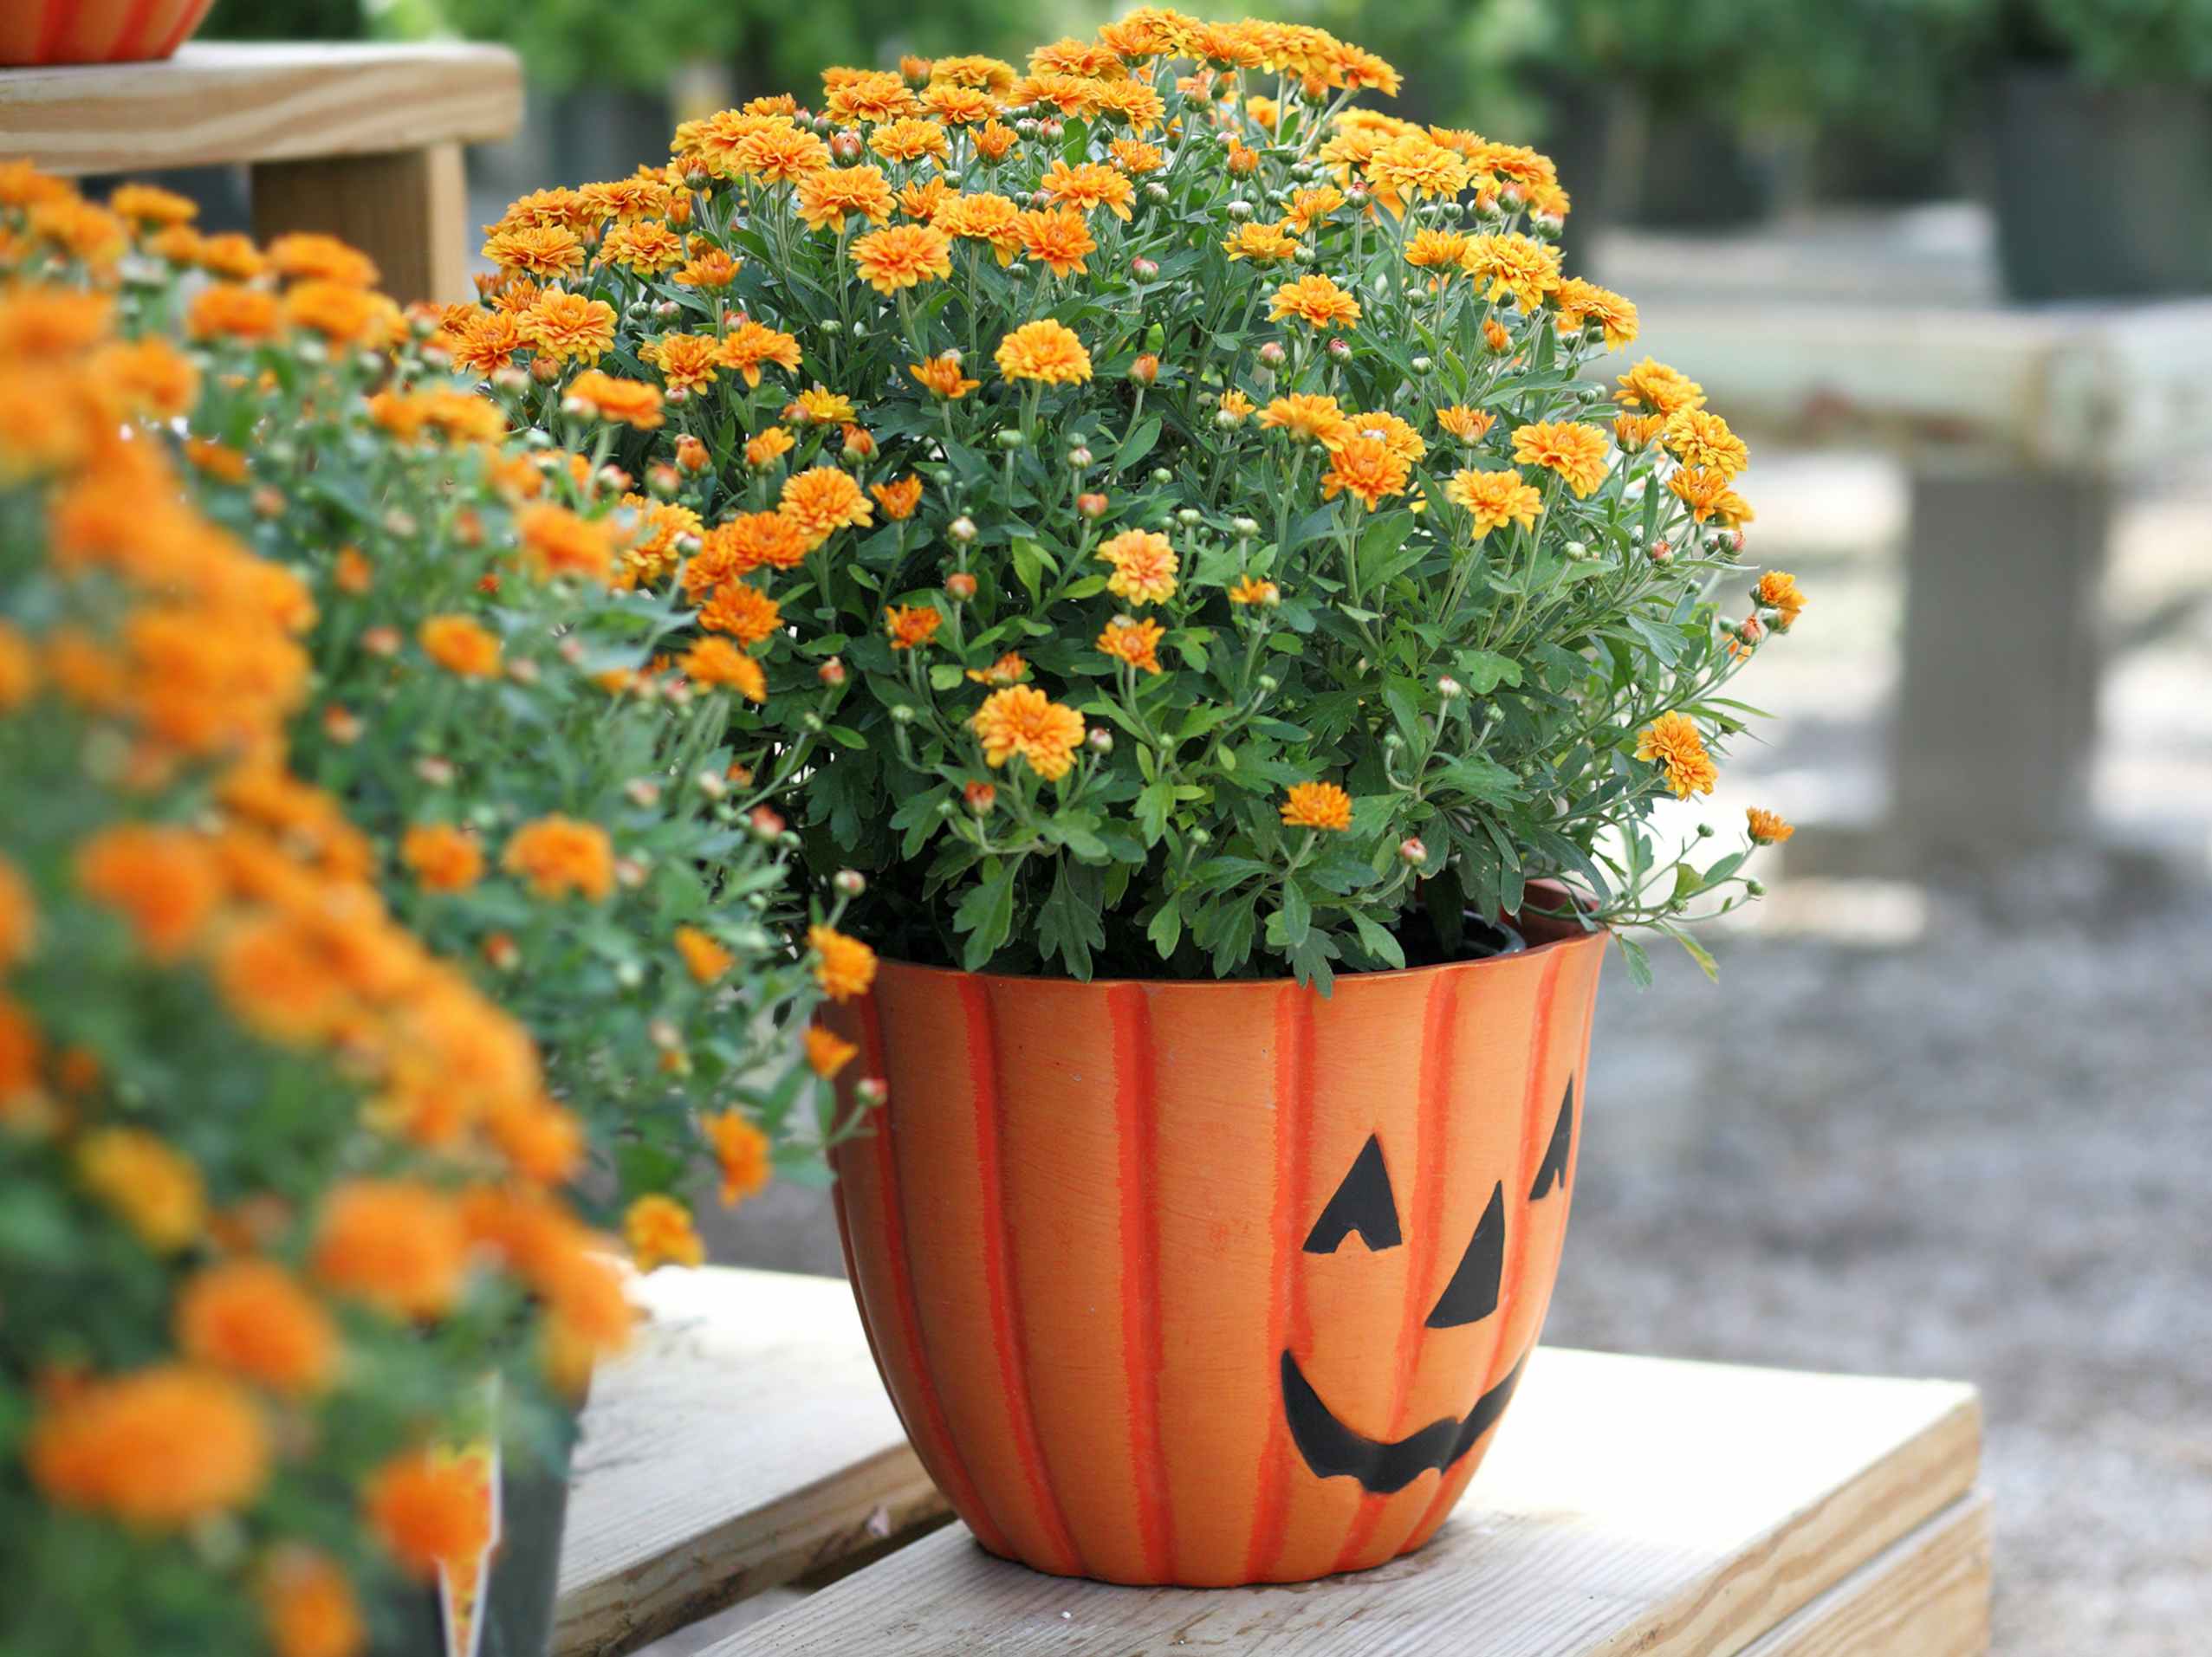 A Halloween pumpkin pail being used as a planter with flowers potted in it.